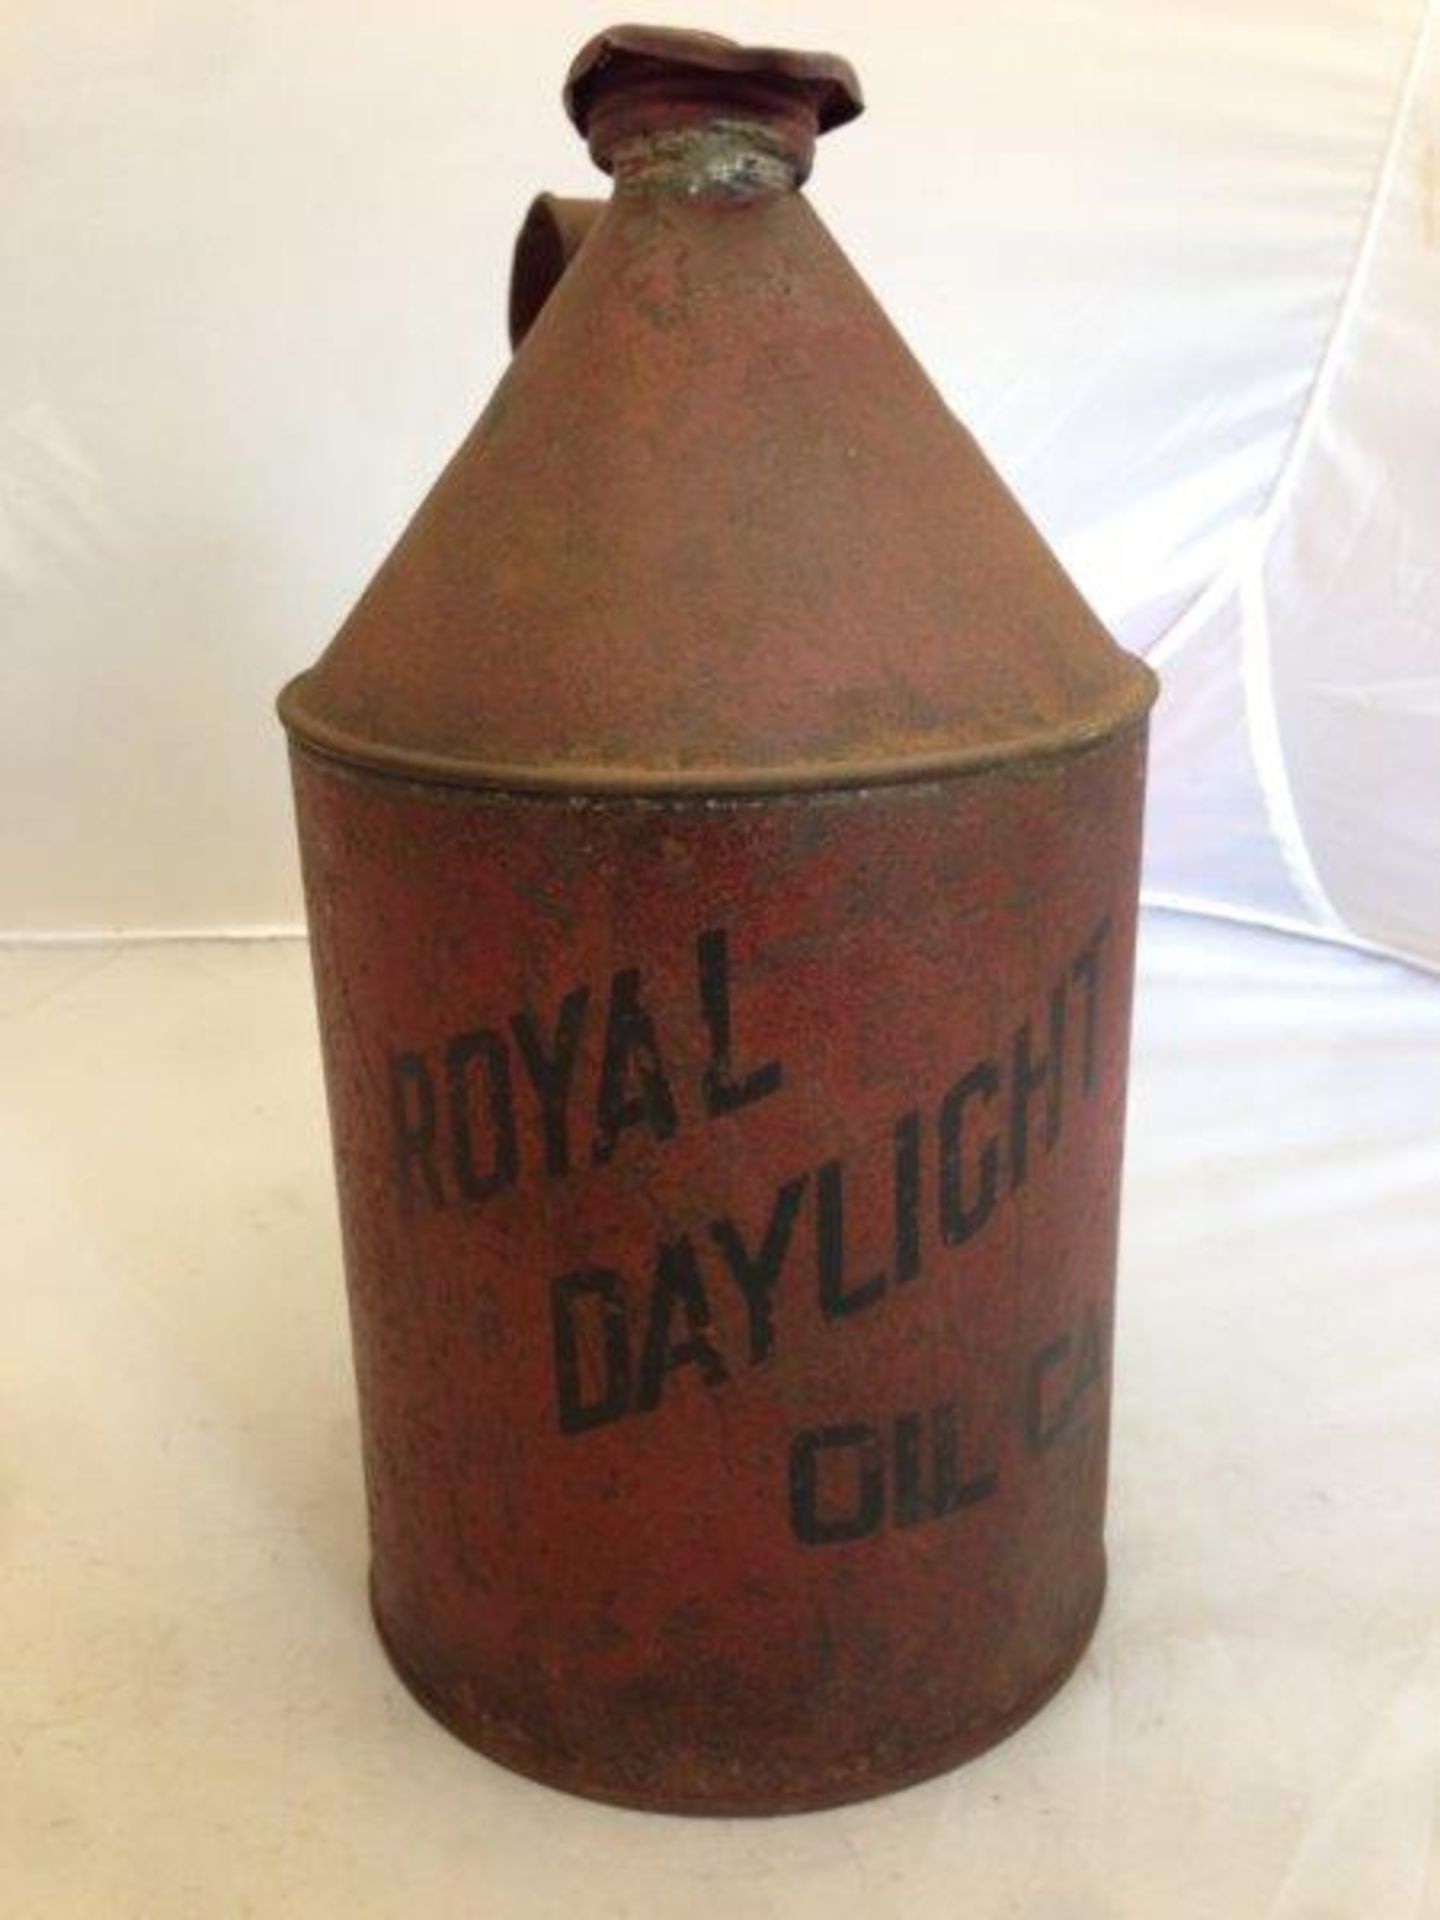 An Esso Royal Daylight Paraffin cylindrical can with cap.